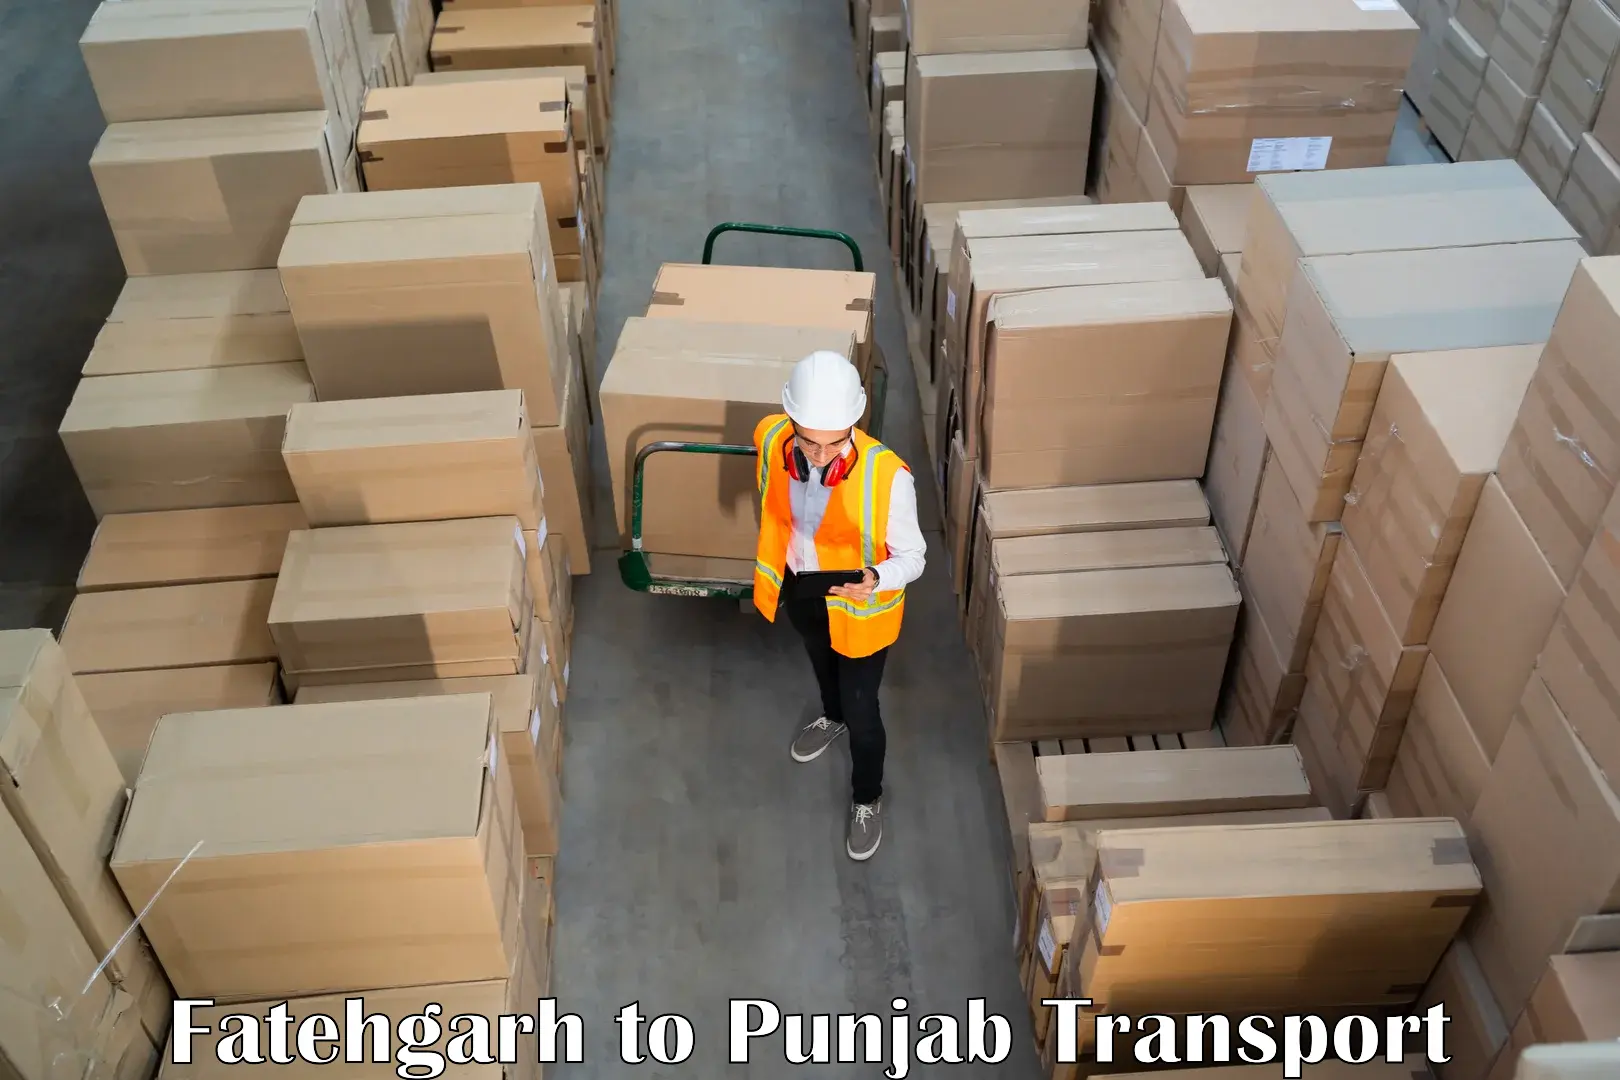 Domestic goods transportation services in Fatehgarh to Zirakpur